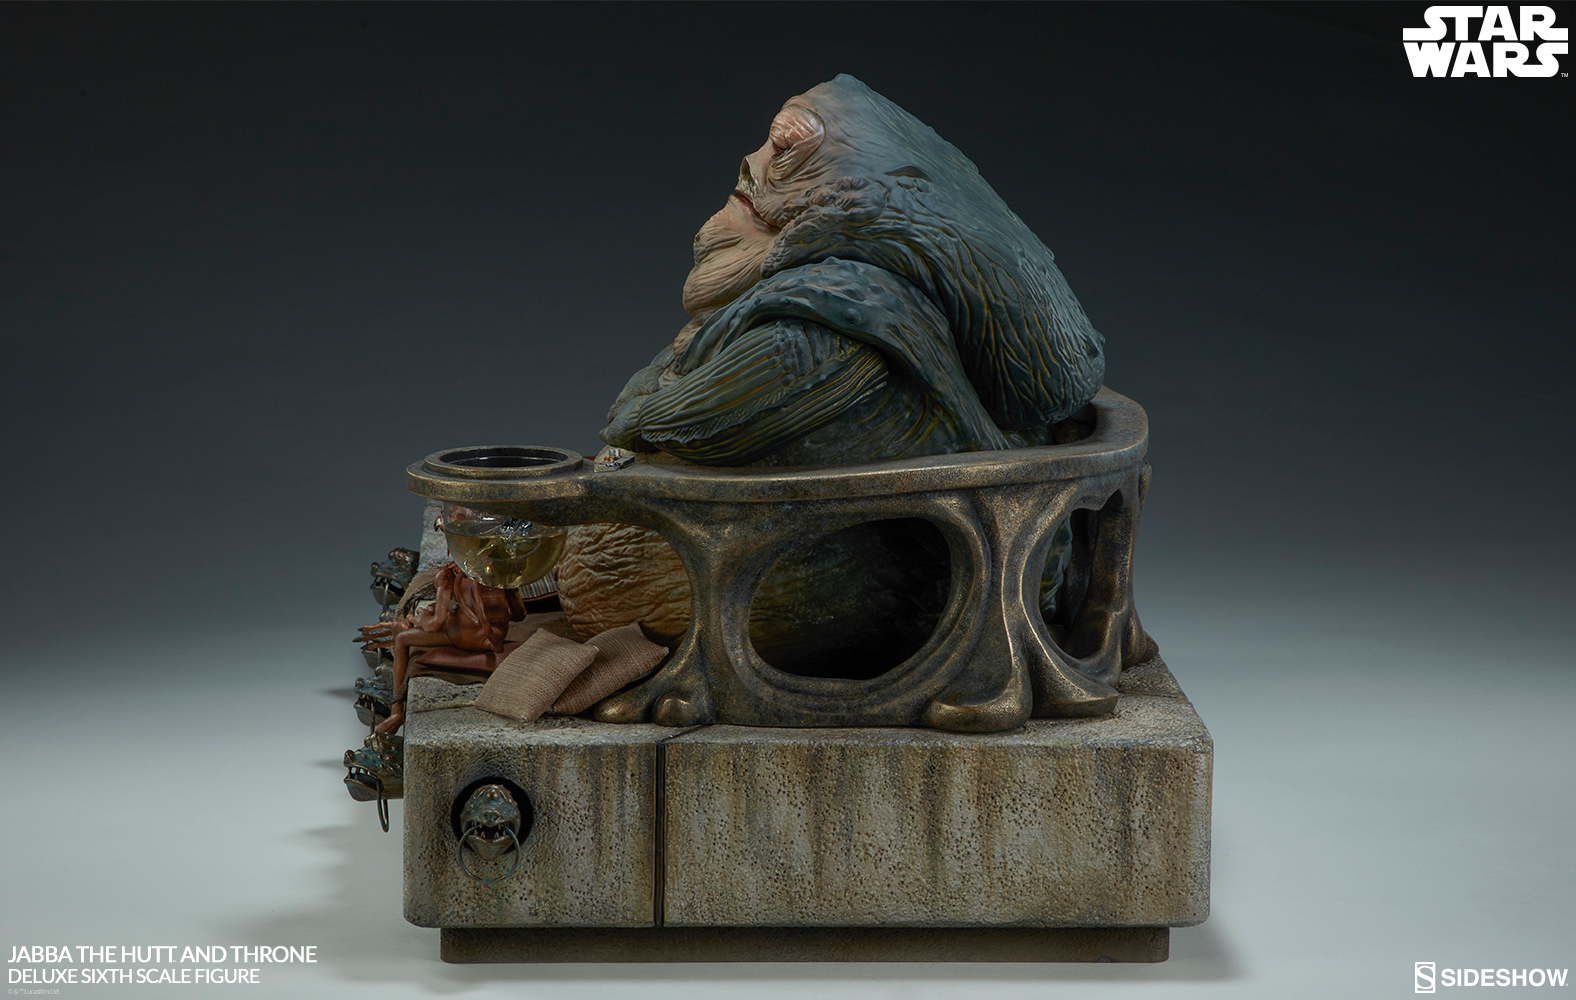 star-wars-jabba-the-hutt-and-throne-deluxe-sixth-scale-figure-sideshow-100410-12